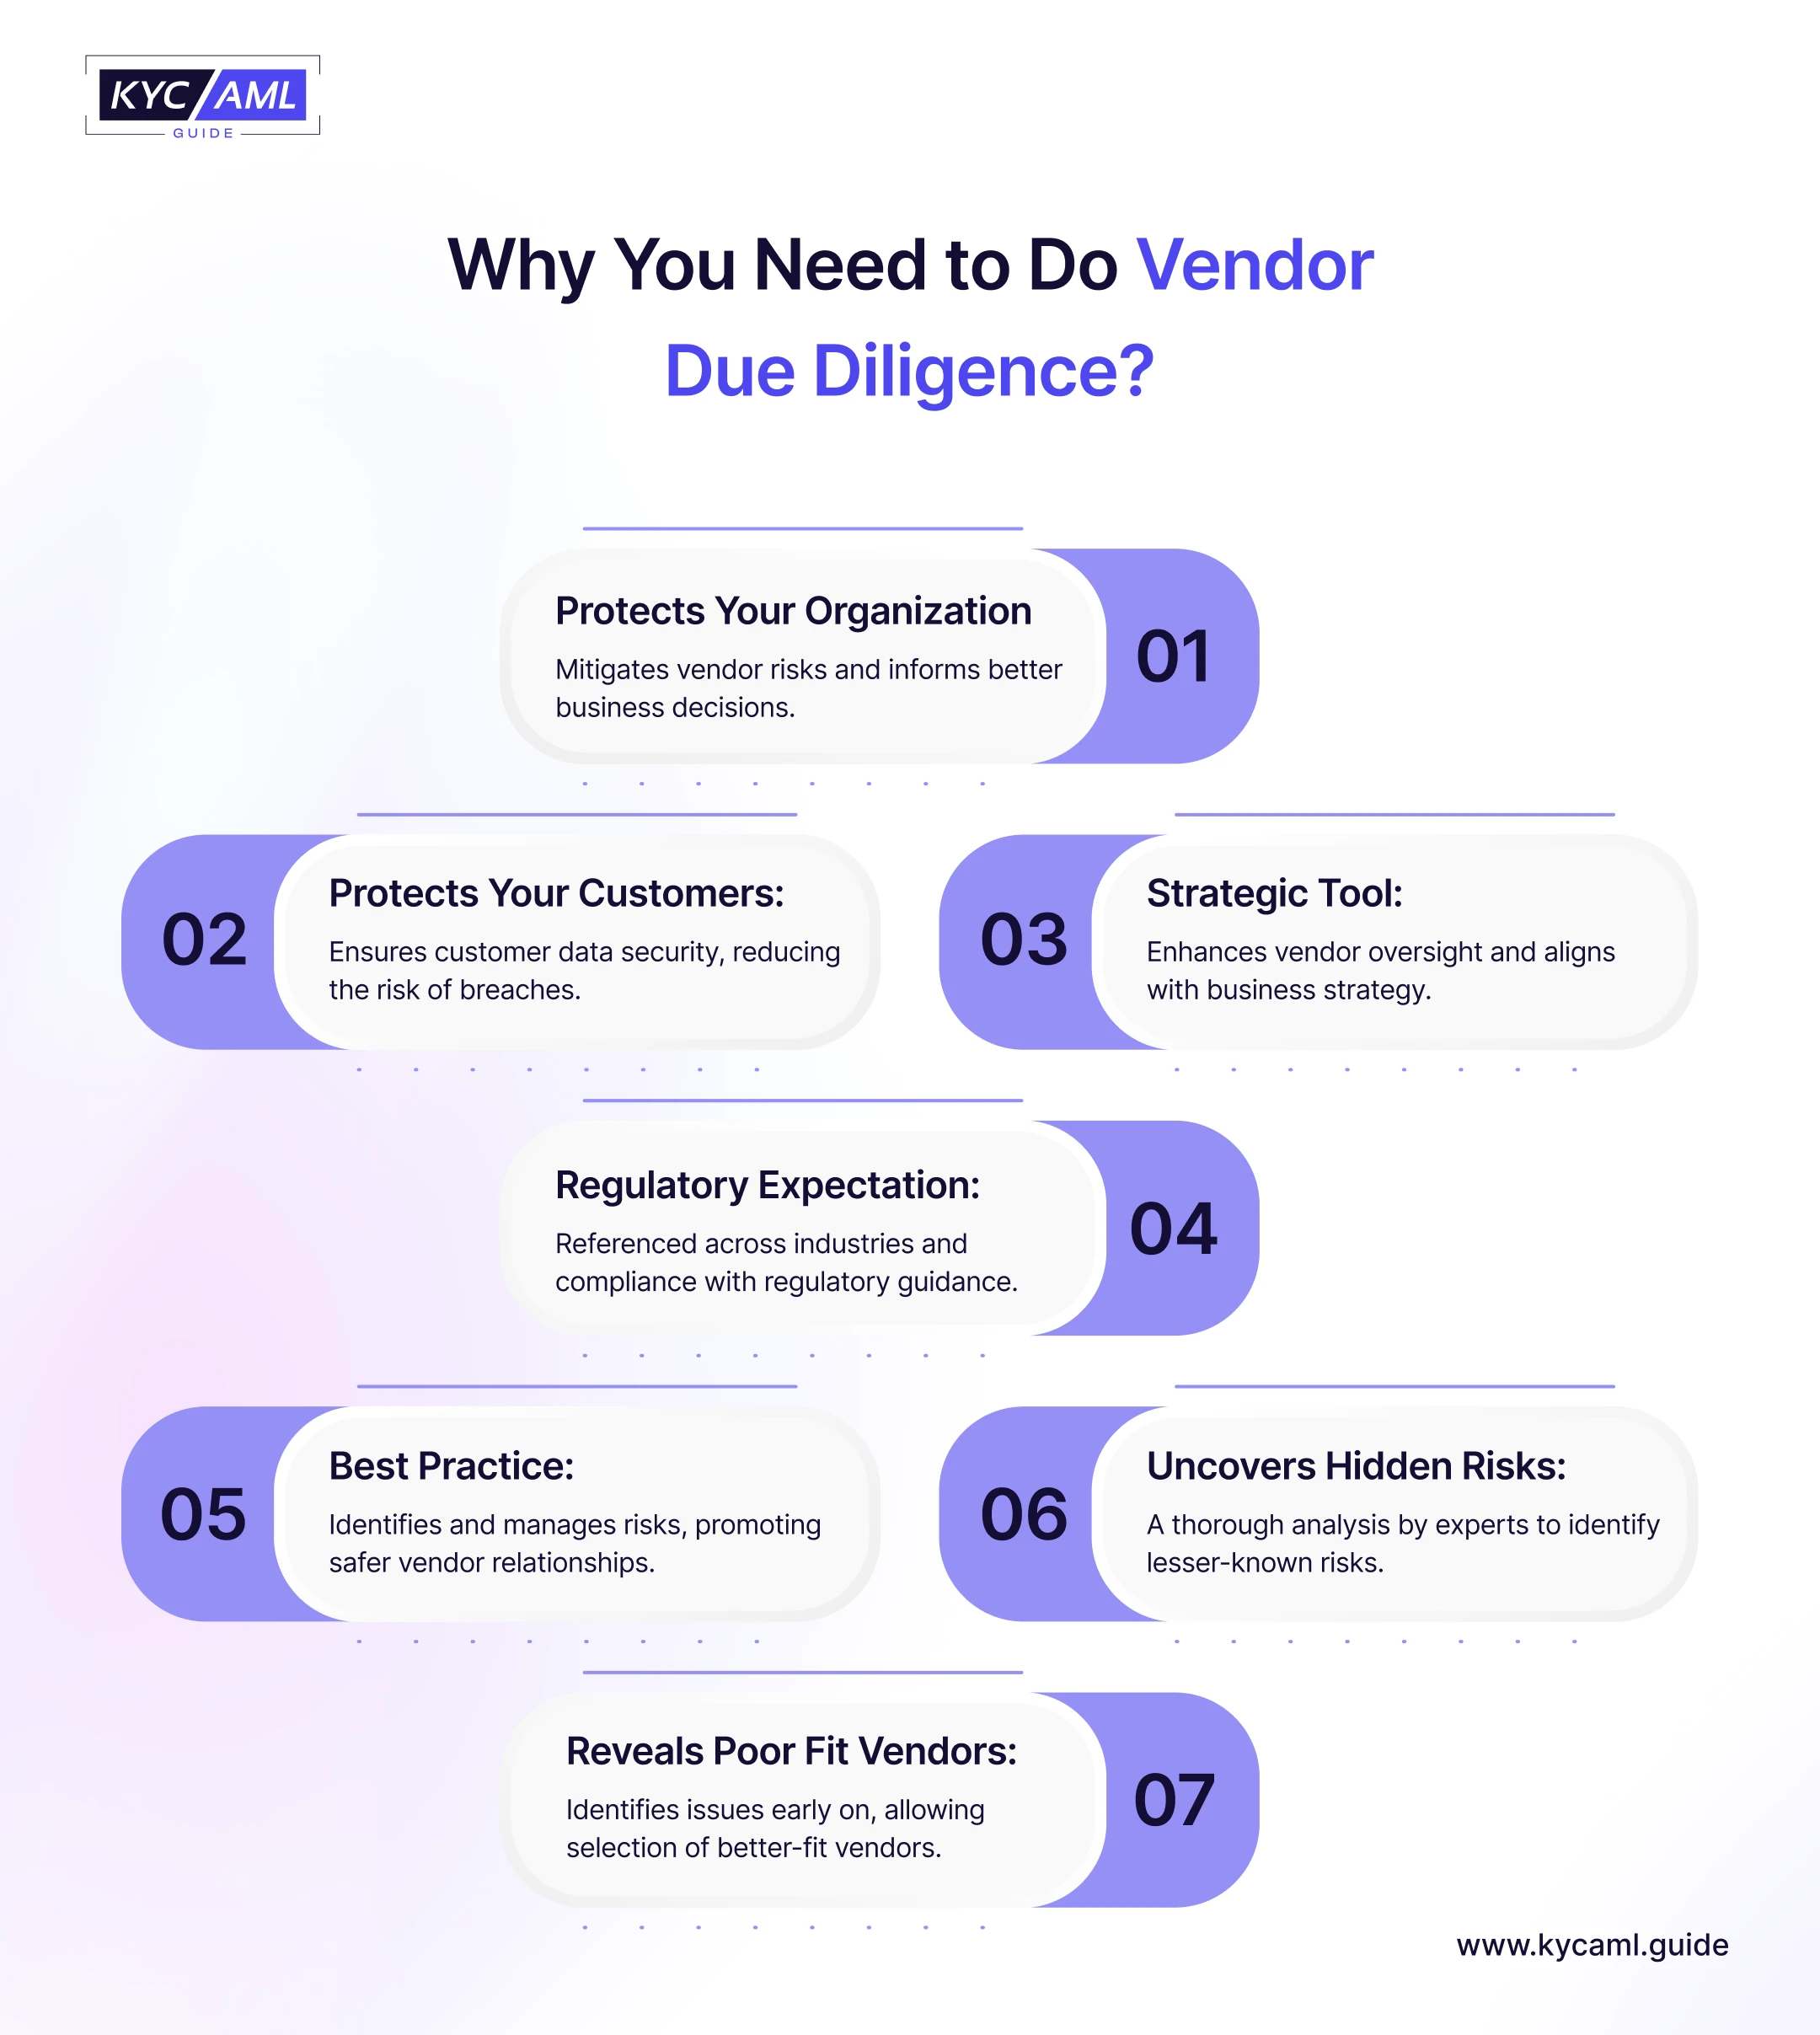 Why is Vendor Due Diligence Important?